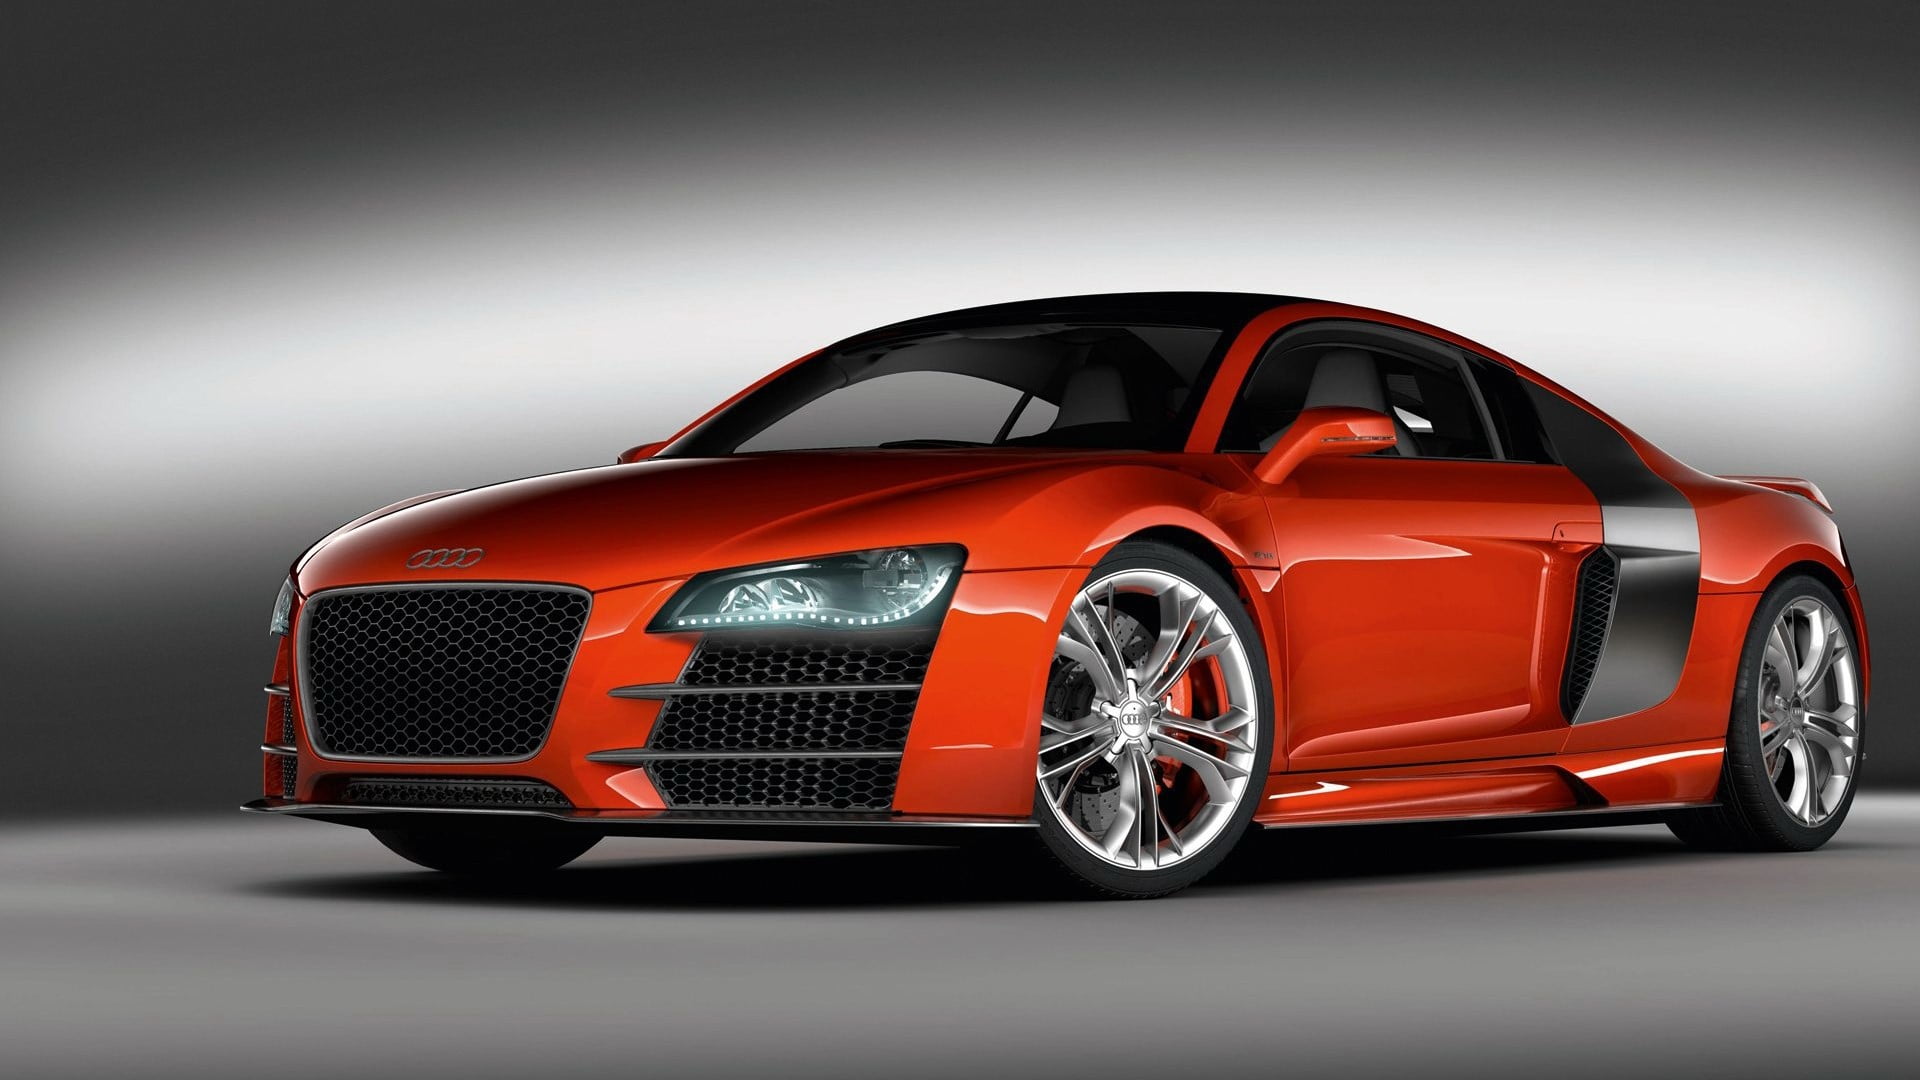 red Audi coupe, car, red cars, motor vehicle, mode of transportation